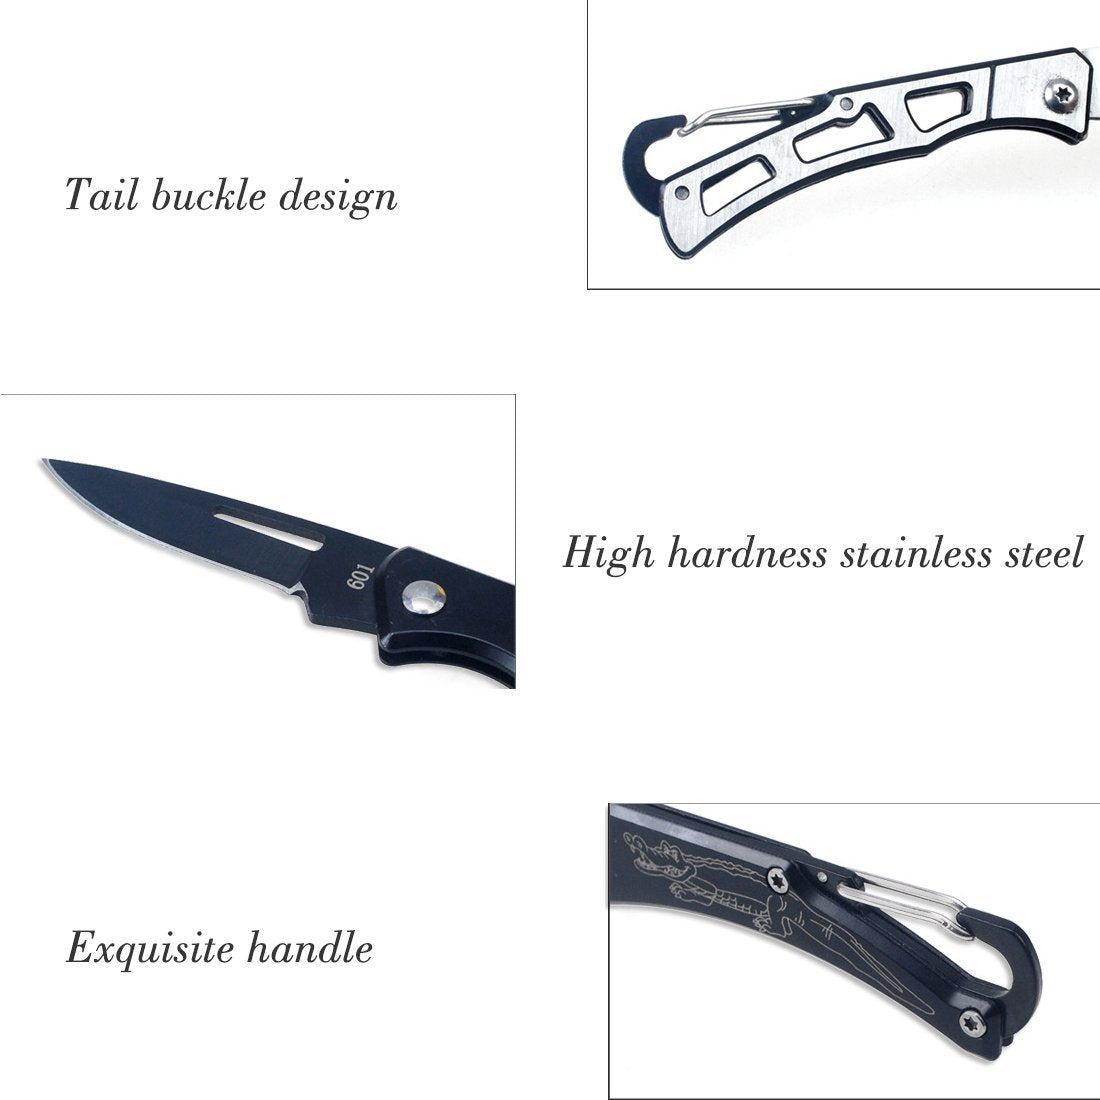 Portable Folding Knife Tactical Rescue Survival Hunting Stainless Handle Outdoor-LoveOutdoor Store-601 Scorpion-Bargain Bait Box